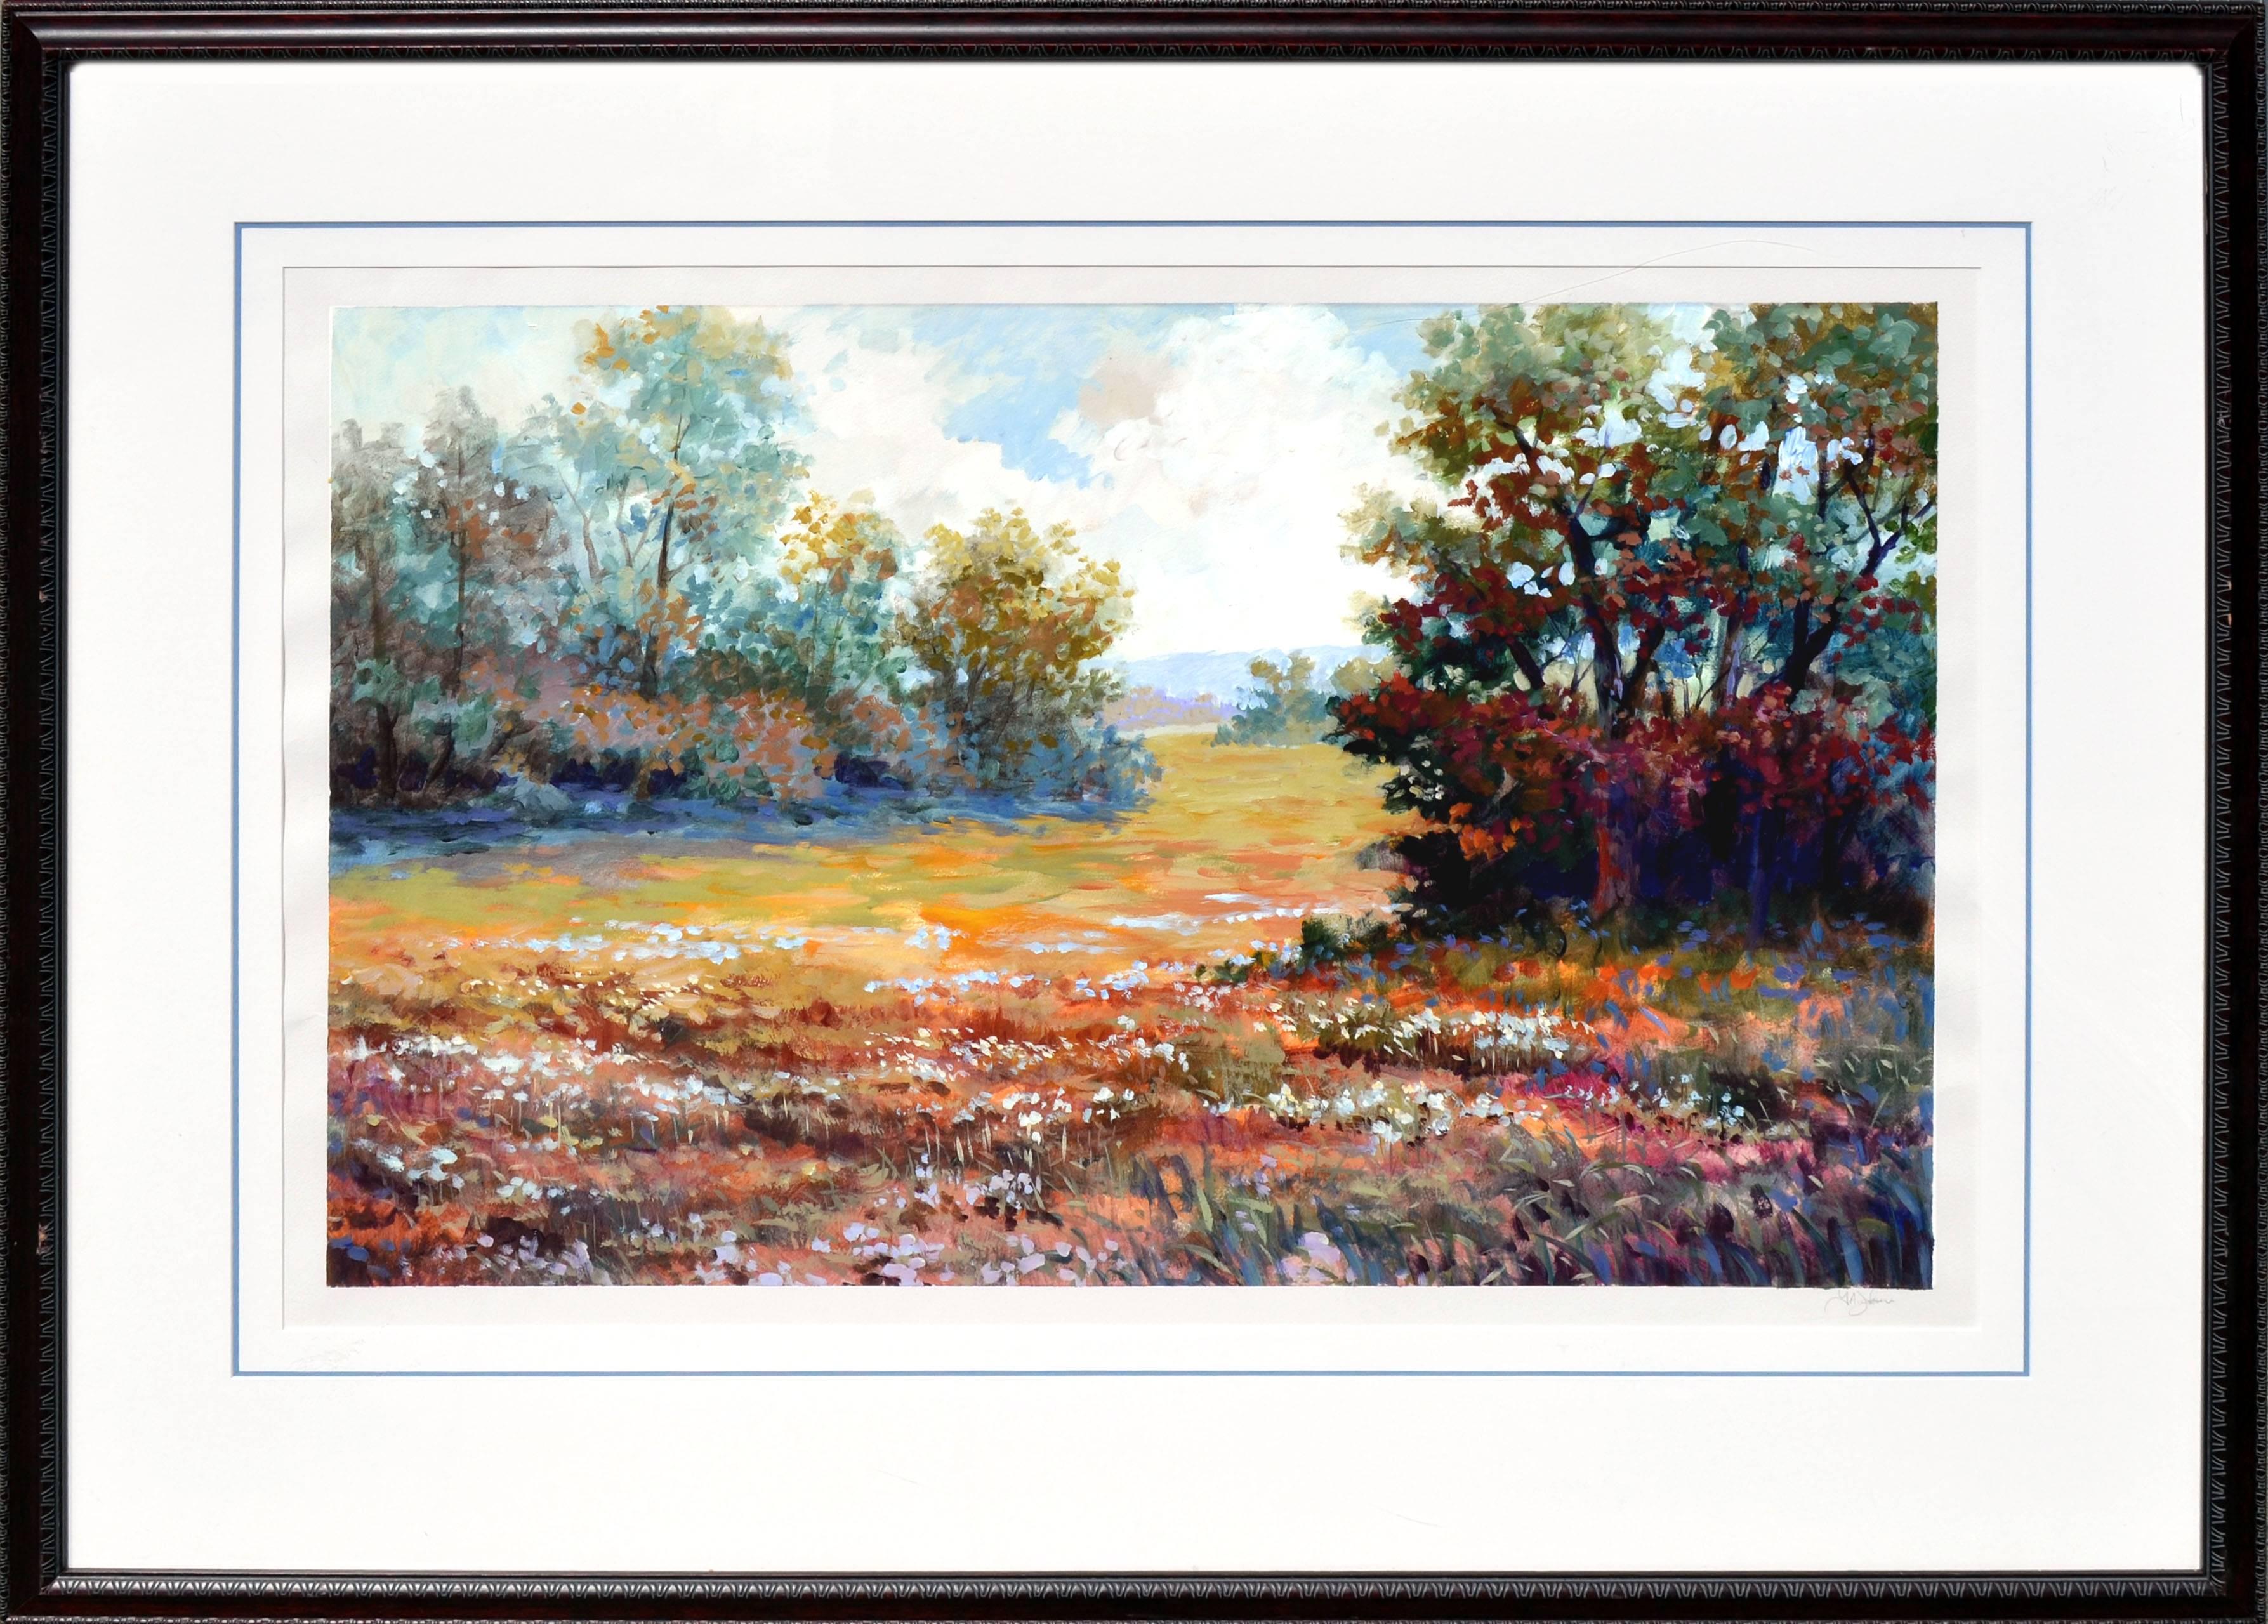 J A Johnson Landscape Painting - Spring in the Valley Landscape